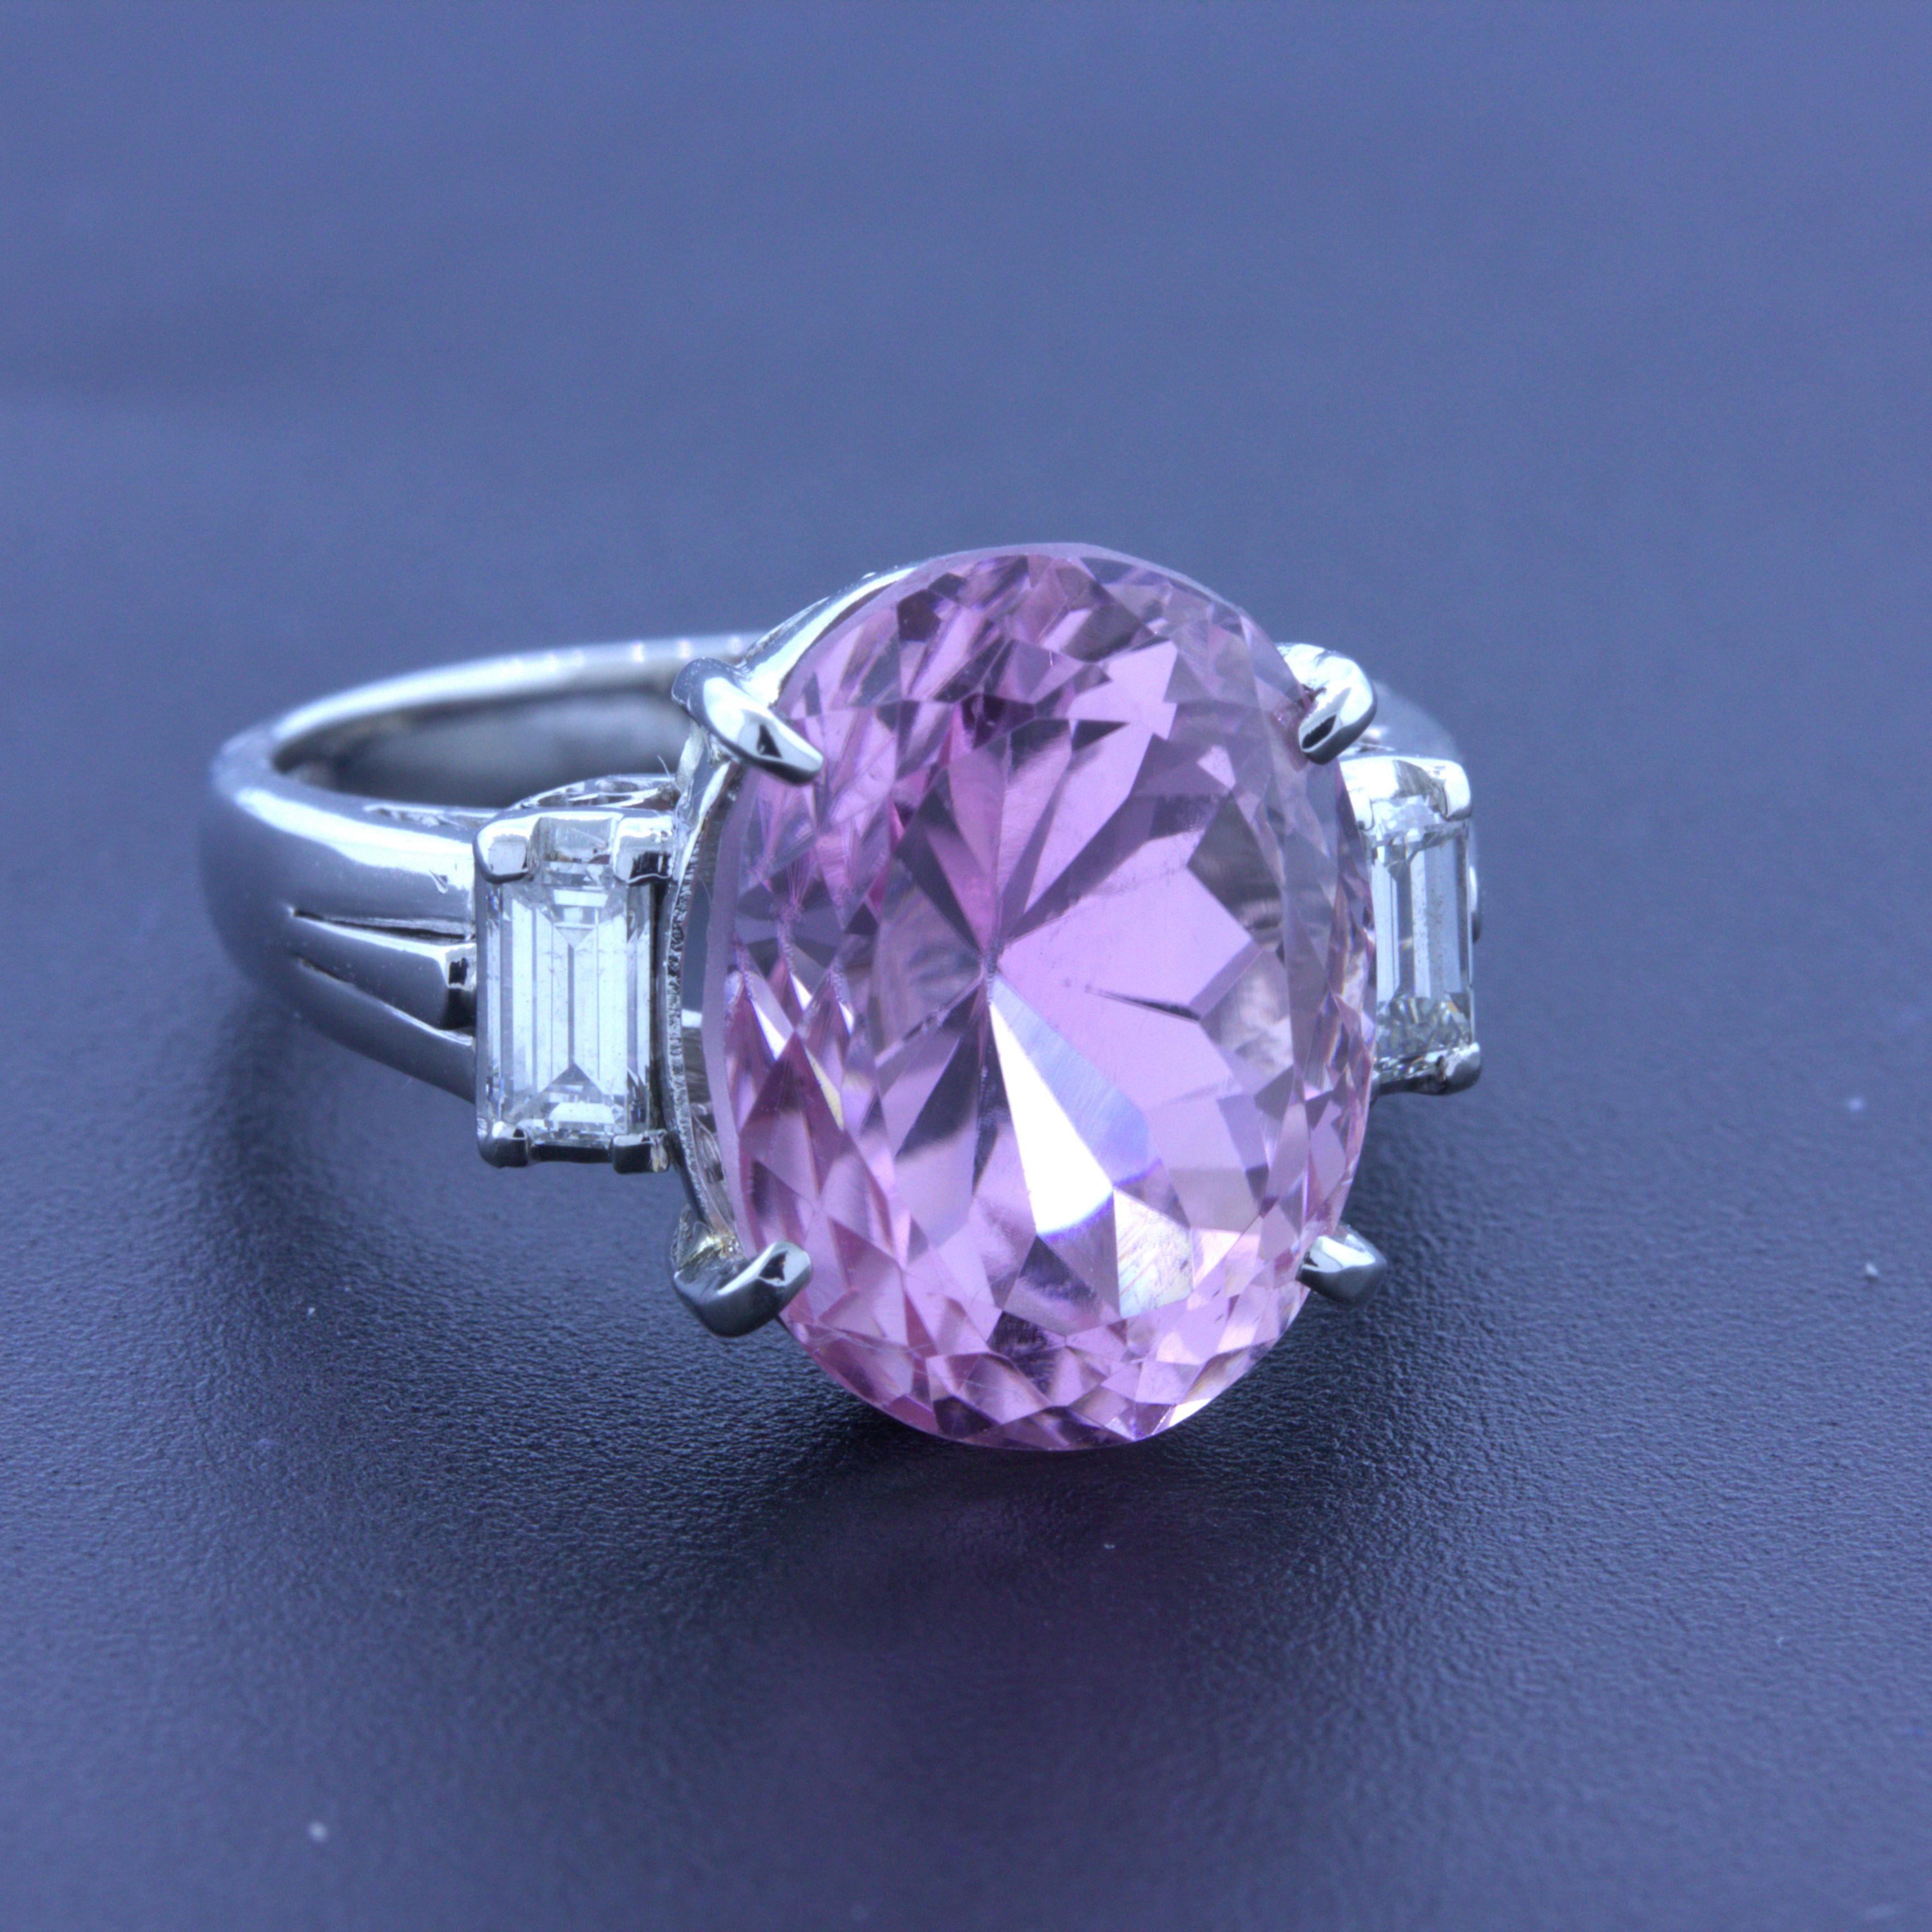 A timeless classic 3-stone platinum ring featuring a fine bright pink kunzite. The kunzite weighs 9.70 carats and glows brightly in the light and is completely clean with no inclusions seen even with a jewelers loupe. It is complemented by two